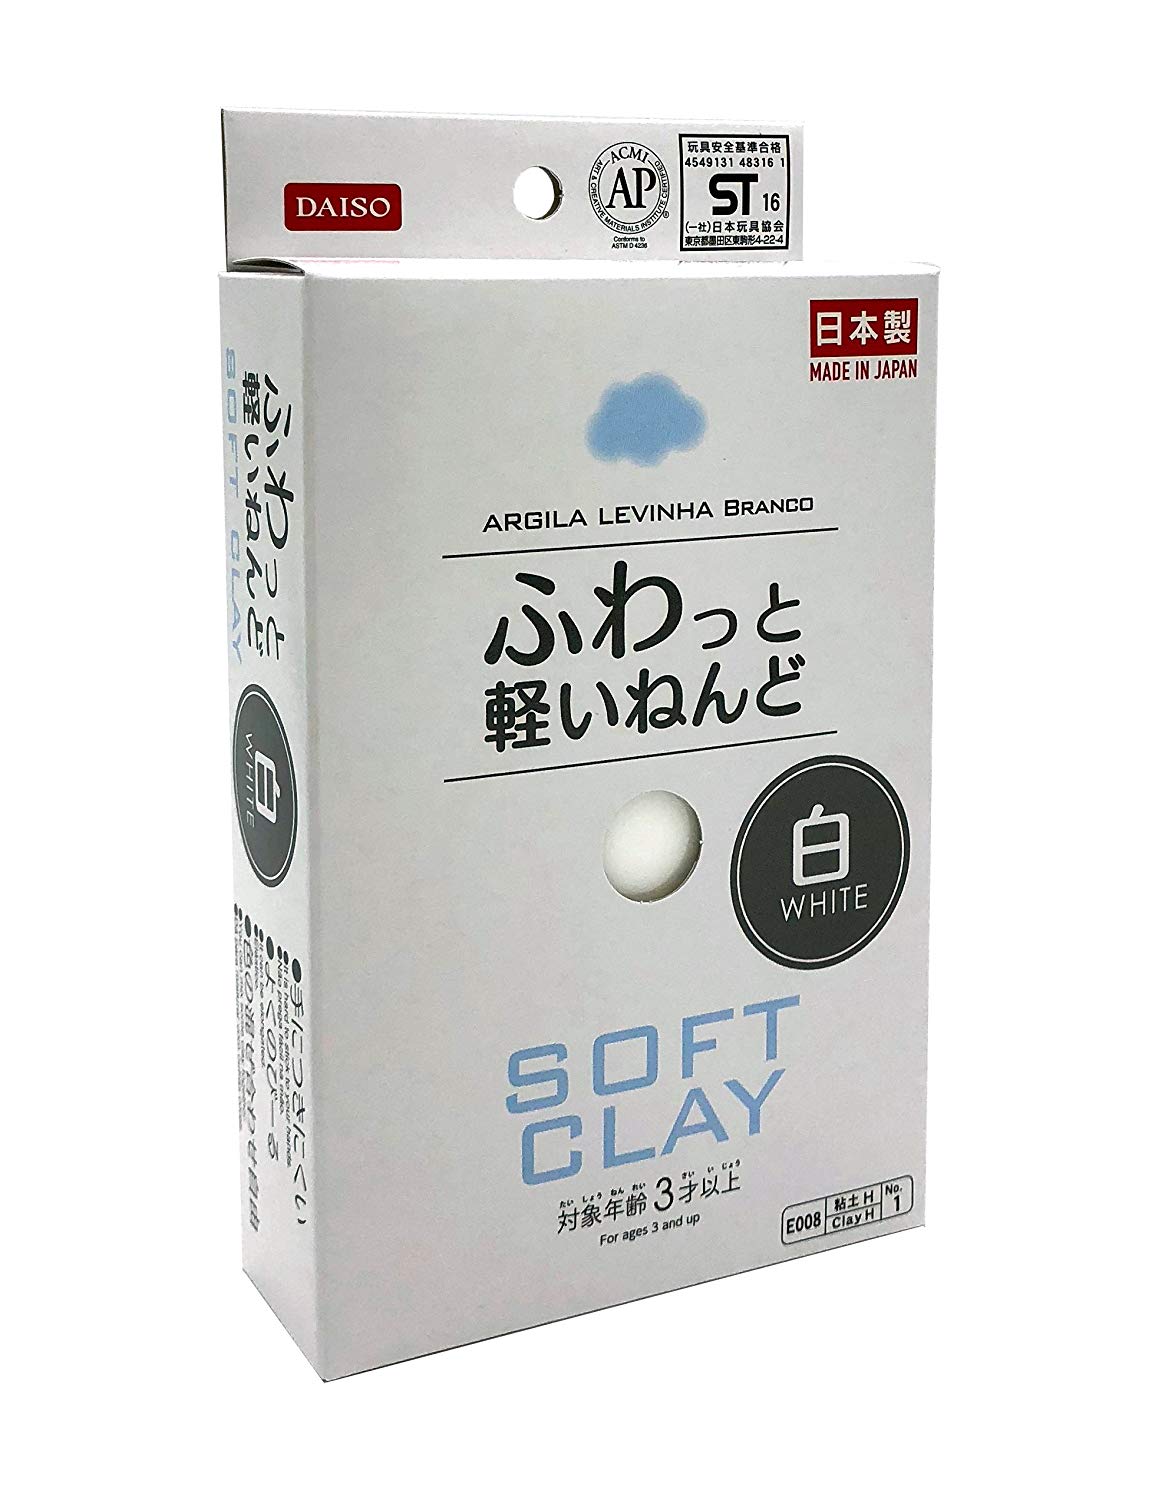 Daiso Japan Soft Clay Set (White) Pack Of 20 - Soft Clay Set